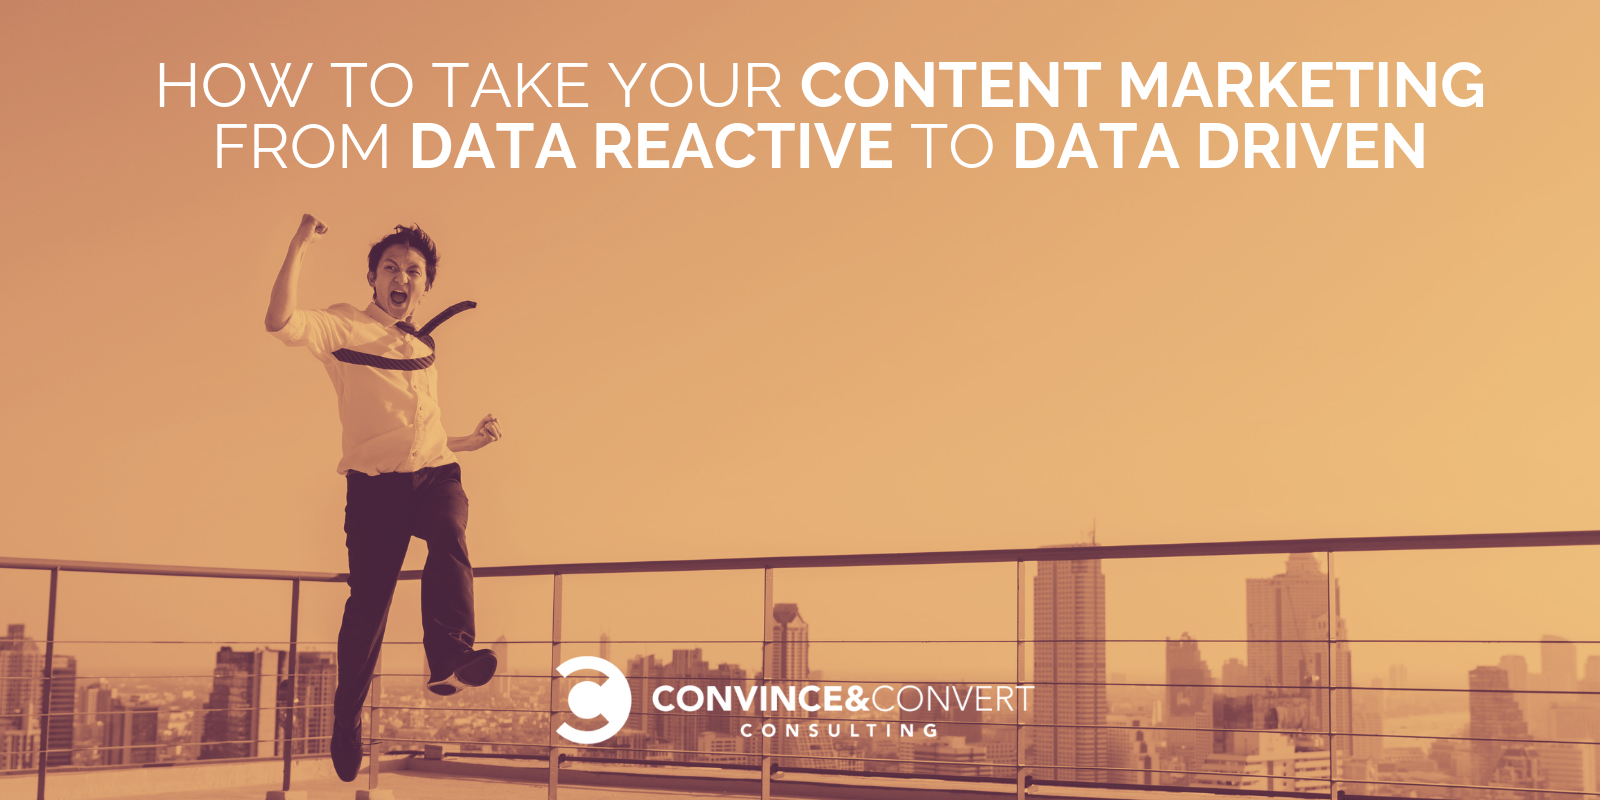 How to Take Your Content Marketing from Data Reactive to Data Driven